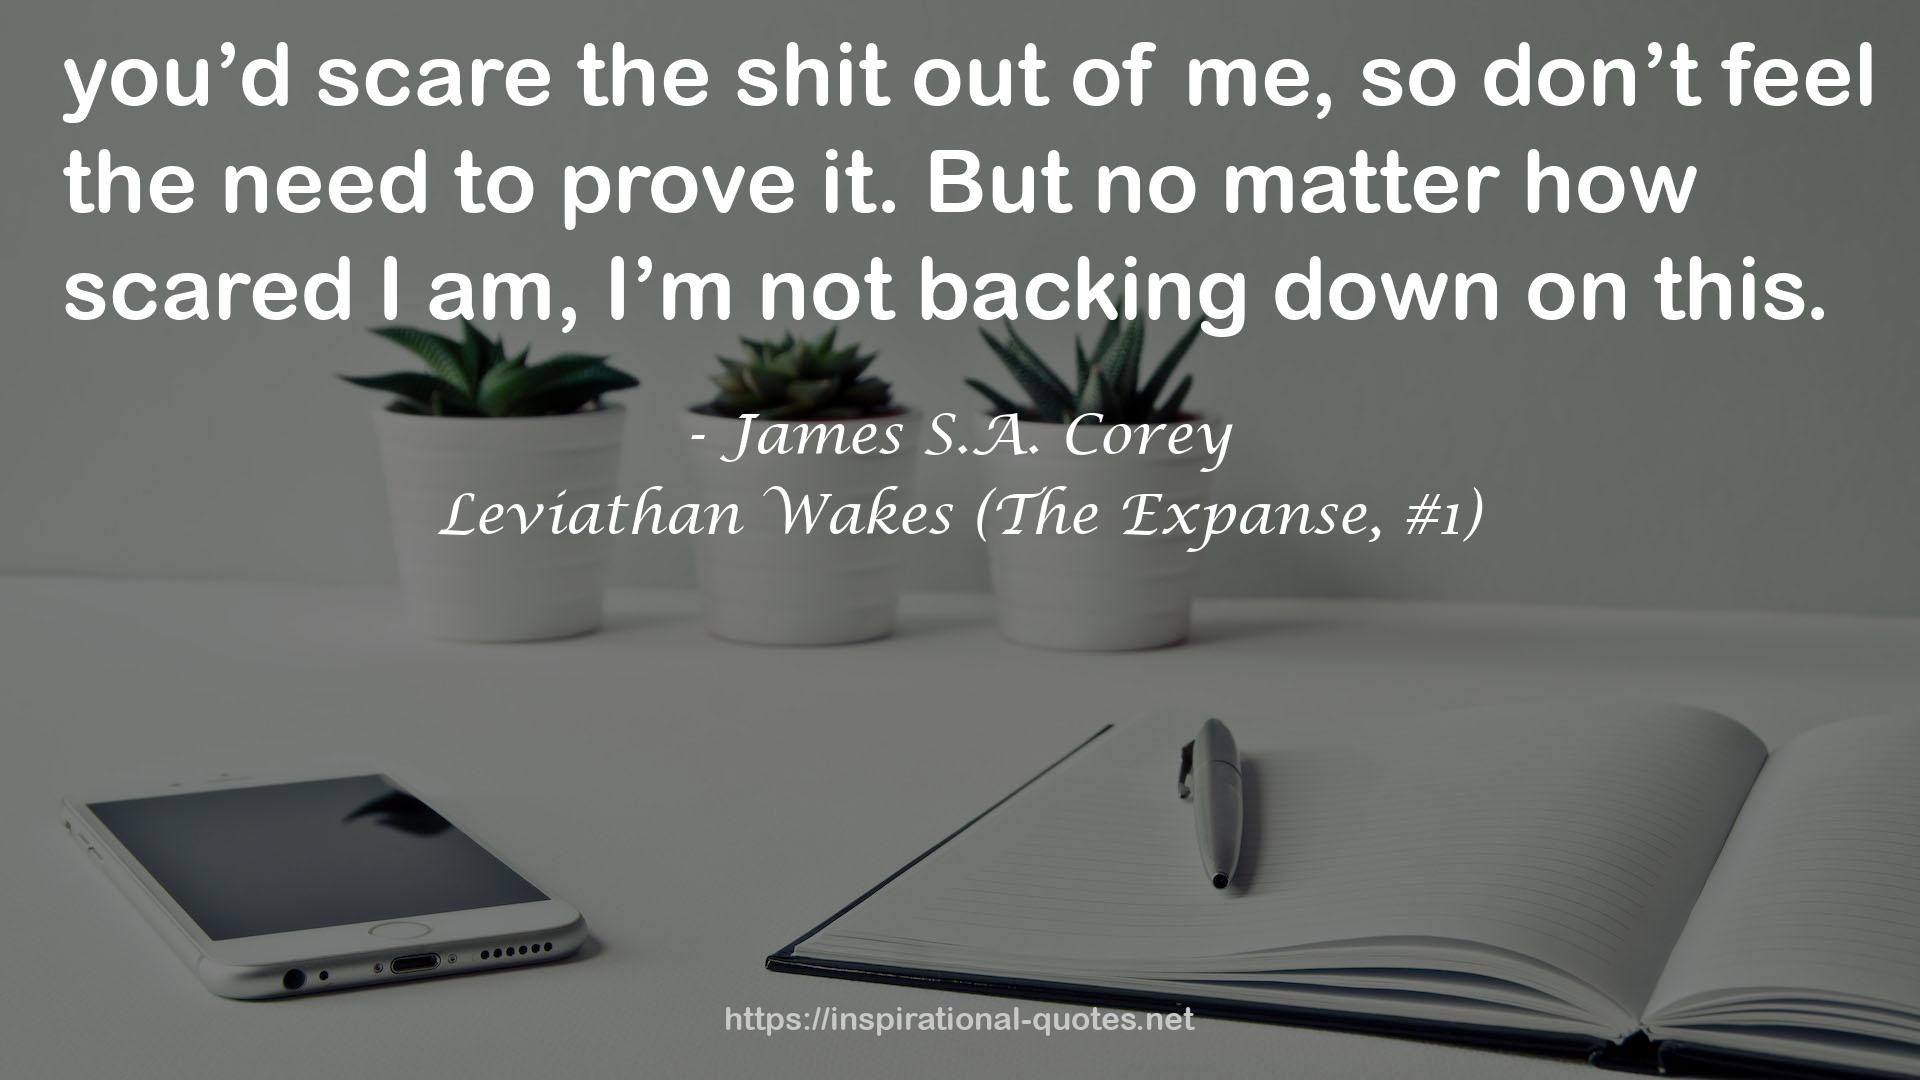 Leviathan Wakes (The Expanse, #1) QUOTES